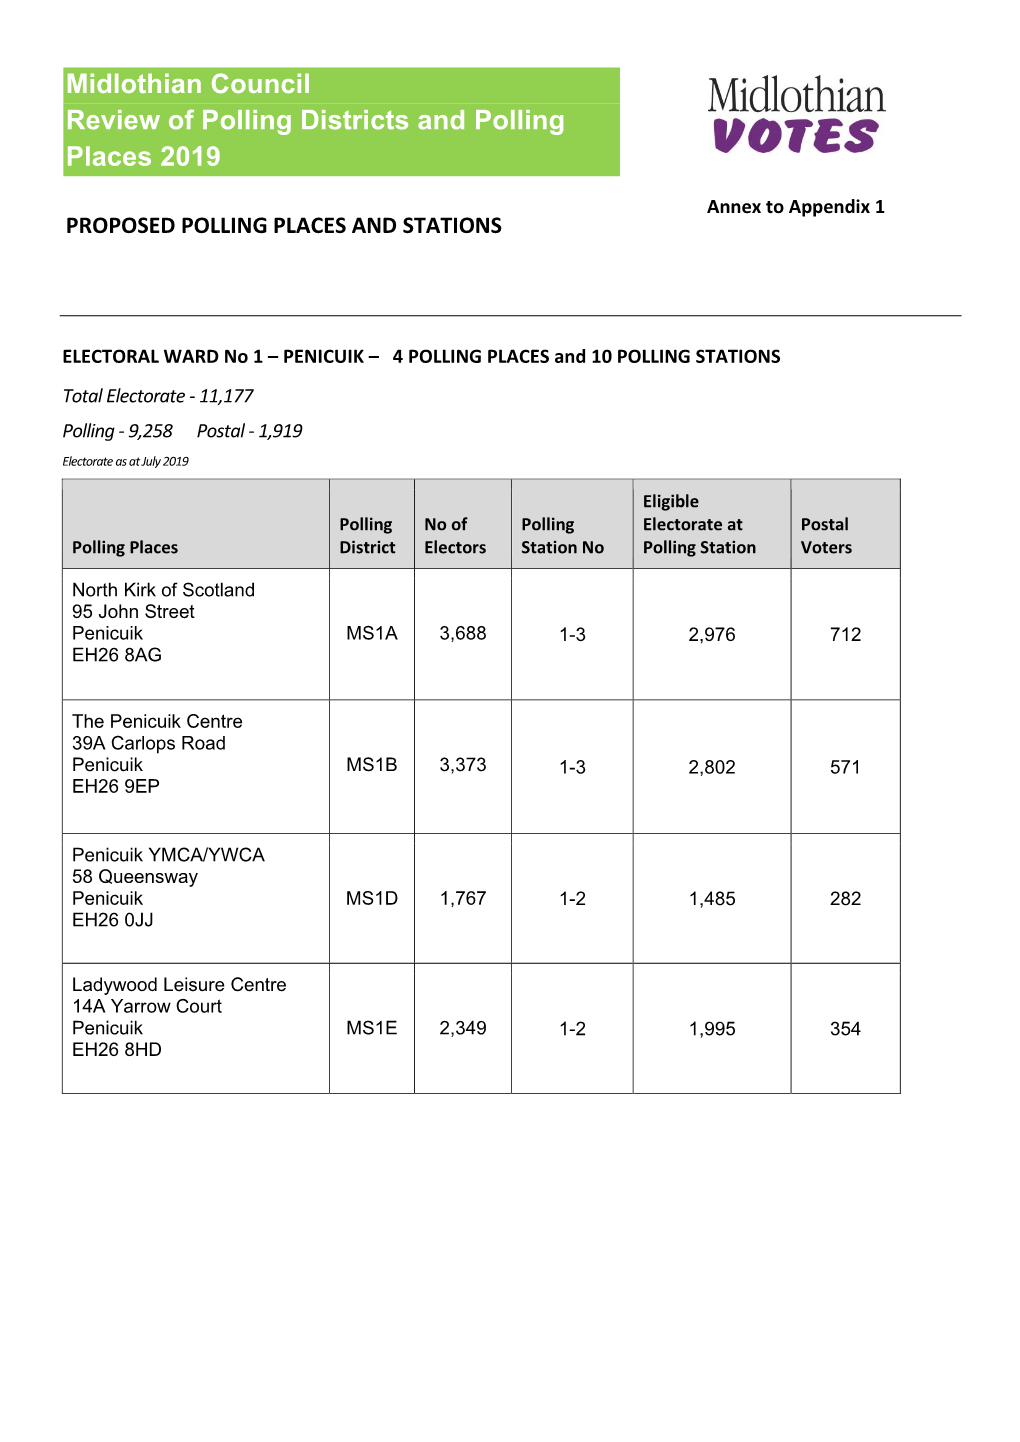 Midlothian Council Review of Polling Districts and Polling Places 2019